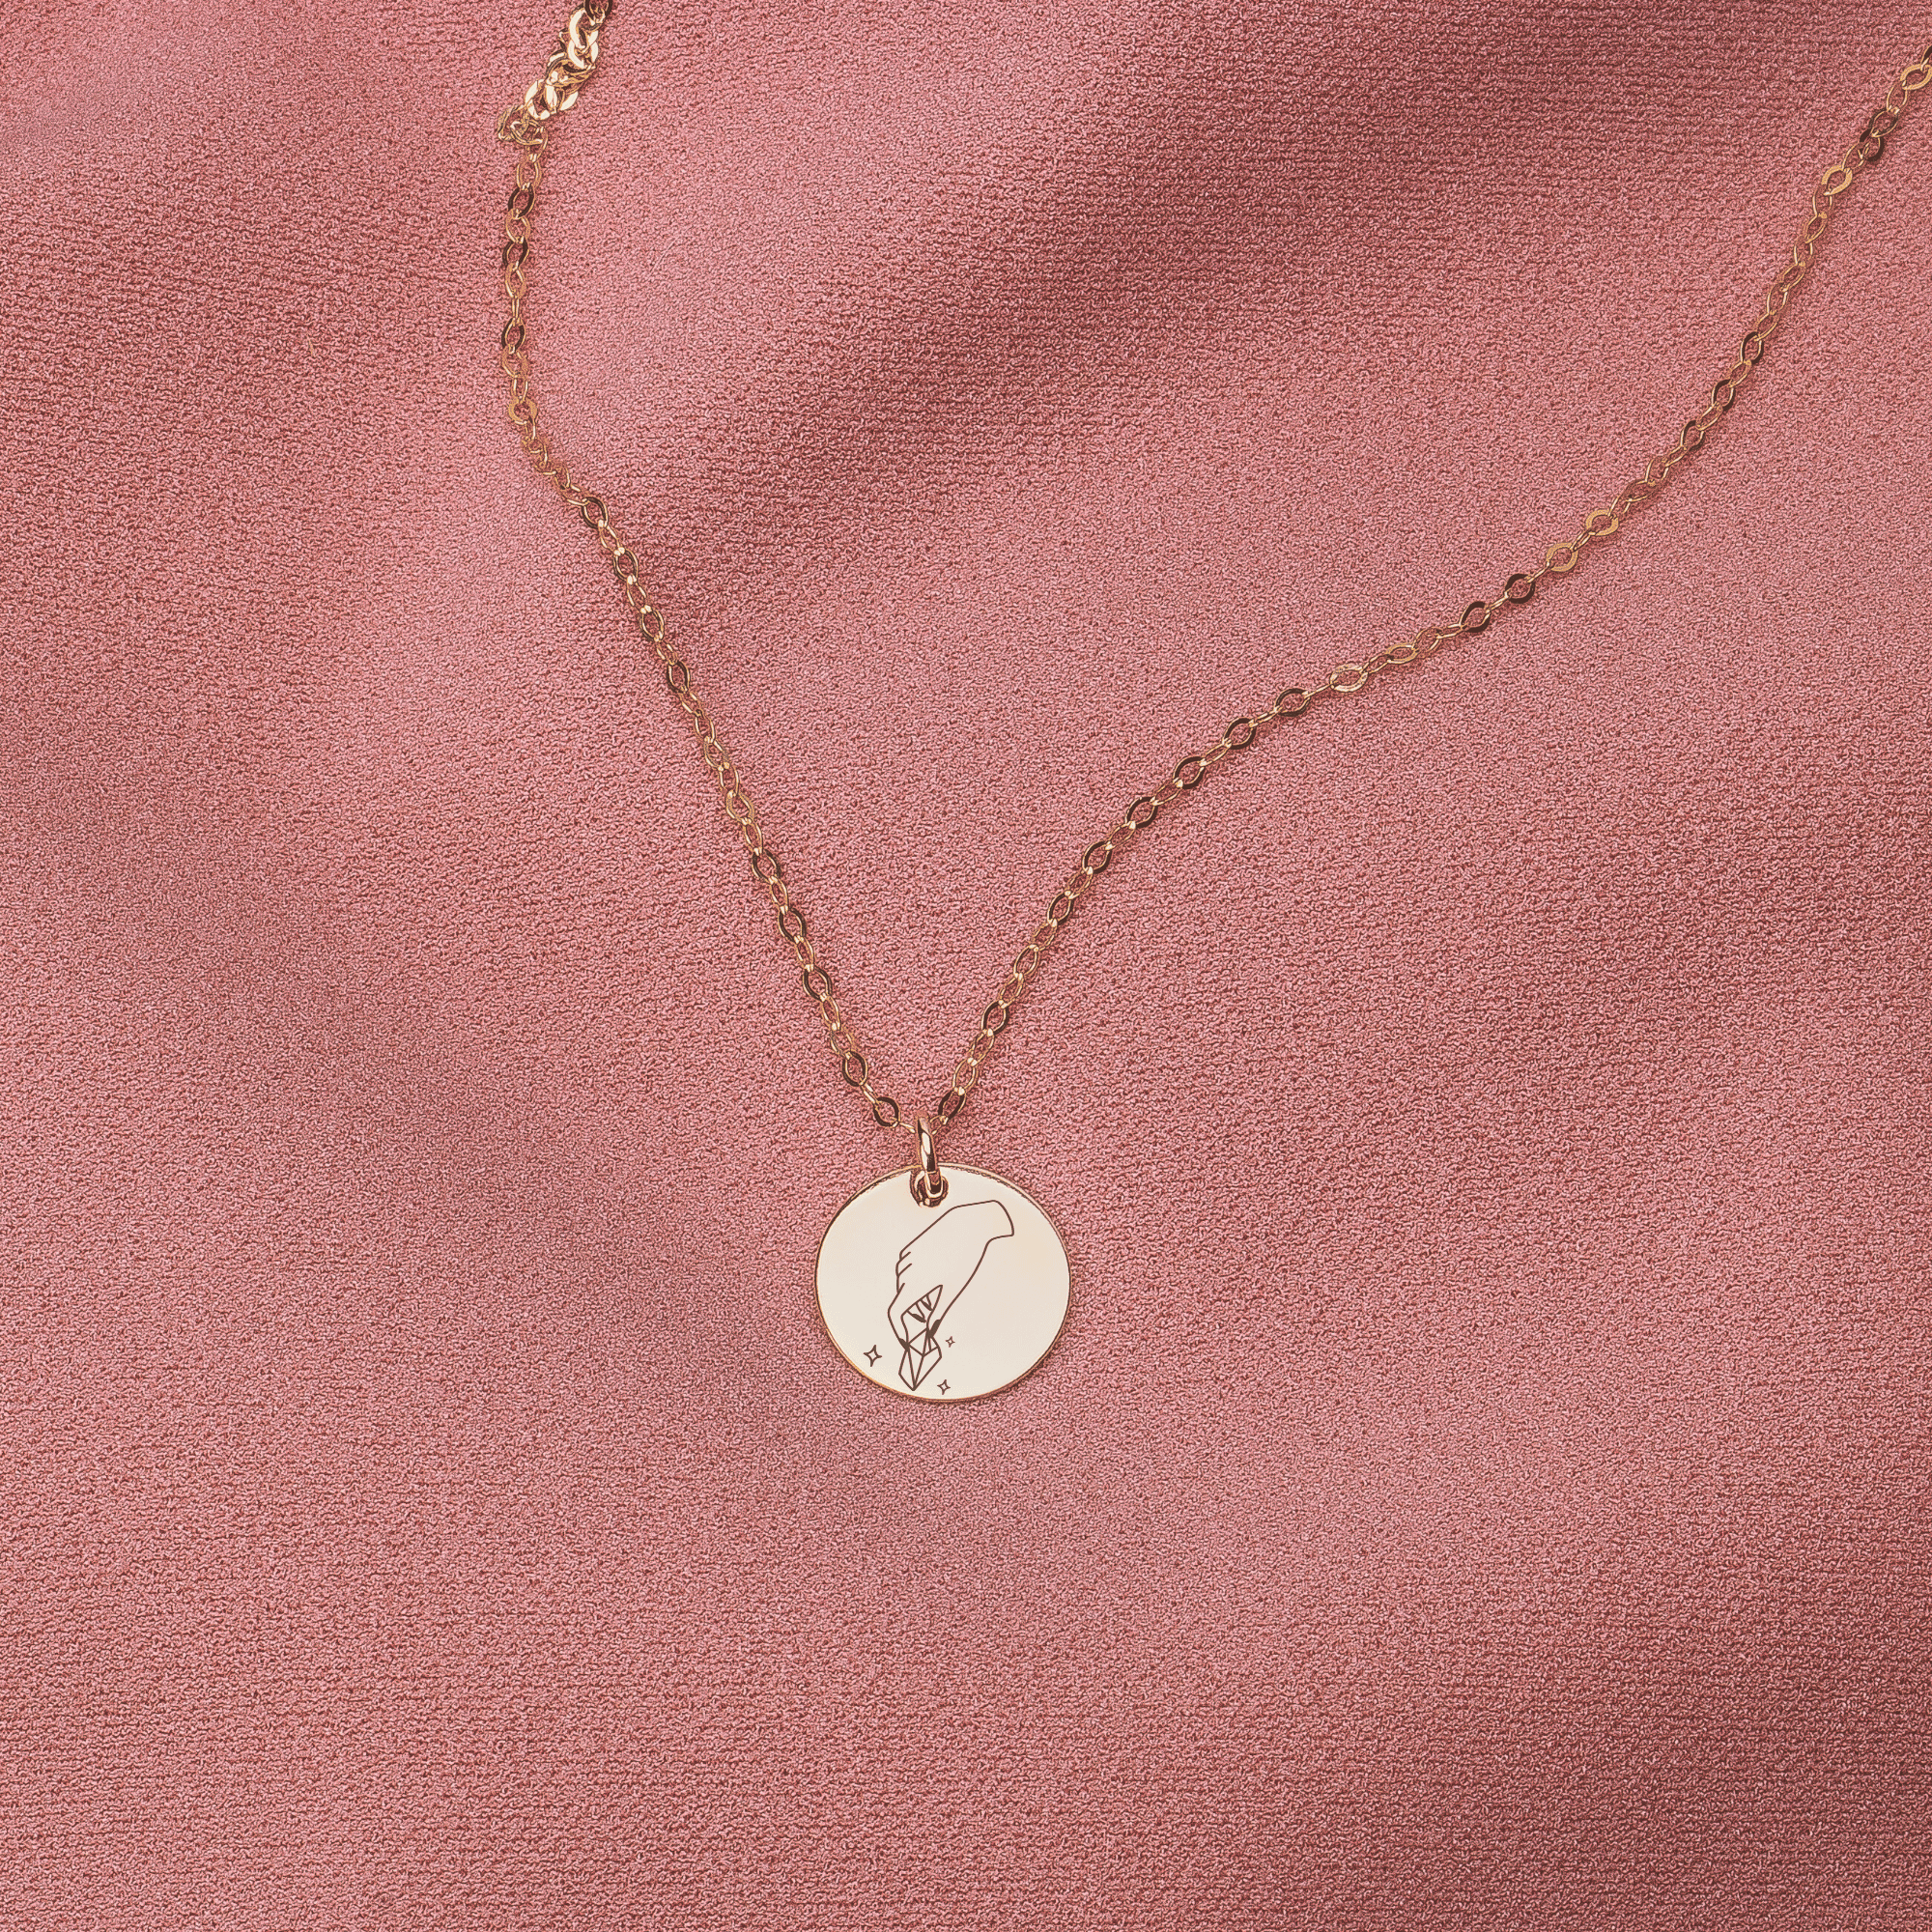 Keep Calm and Hold A Crystal Necklace - Melanie Golden Jewelry - disc necklaces, Engraved Jewelry, minimal minimal necklace, minimal necklace, mystic, necklace, necklaces, symbolic